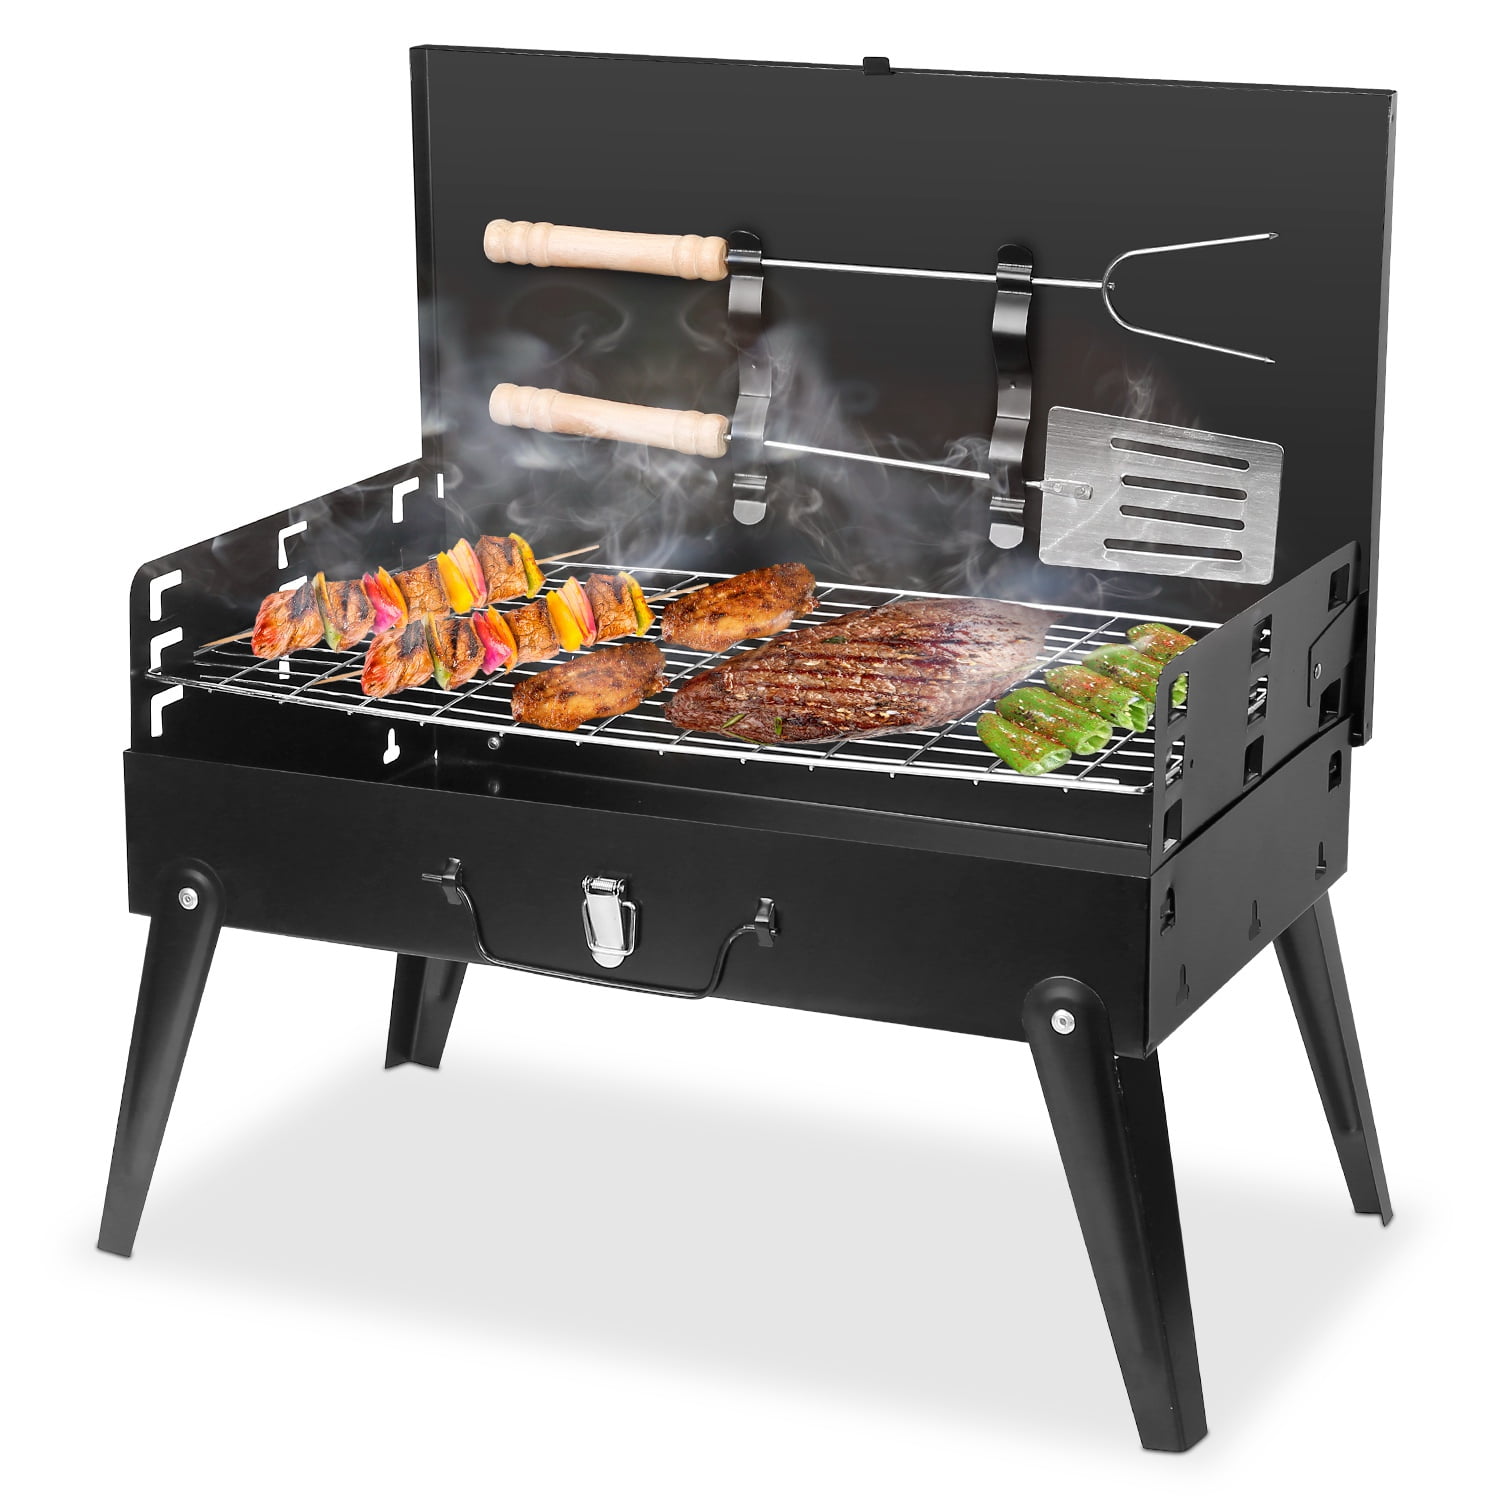 Dropship Portable Charcoal Grill Outdoor Tabletop Grill Small Barbecue  Smoker Folding BBQ Grill With Lid For Backyard Camping Picnics Beach to  Sell Online at a Lower Price